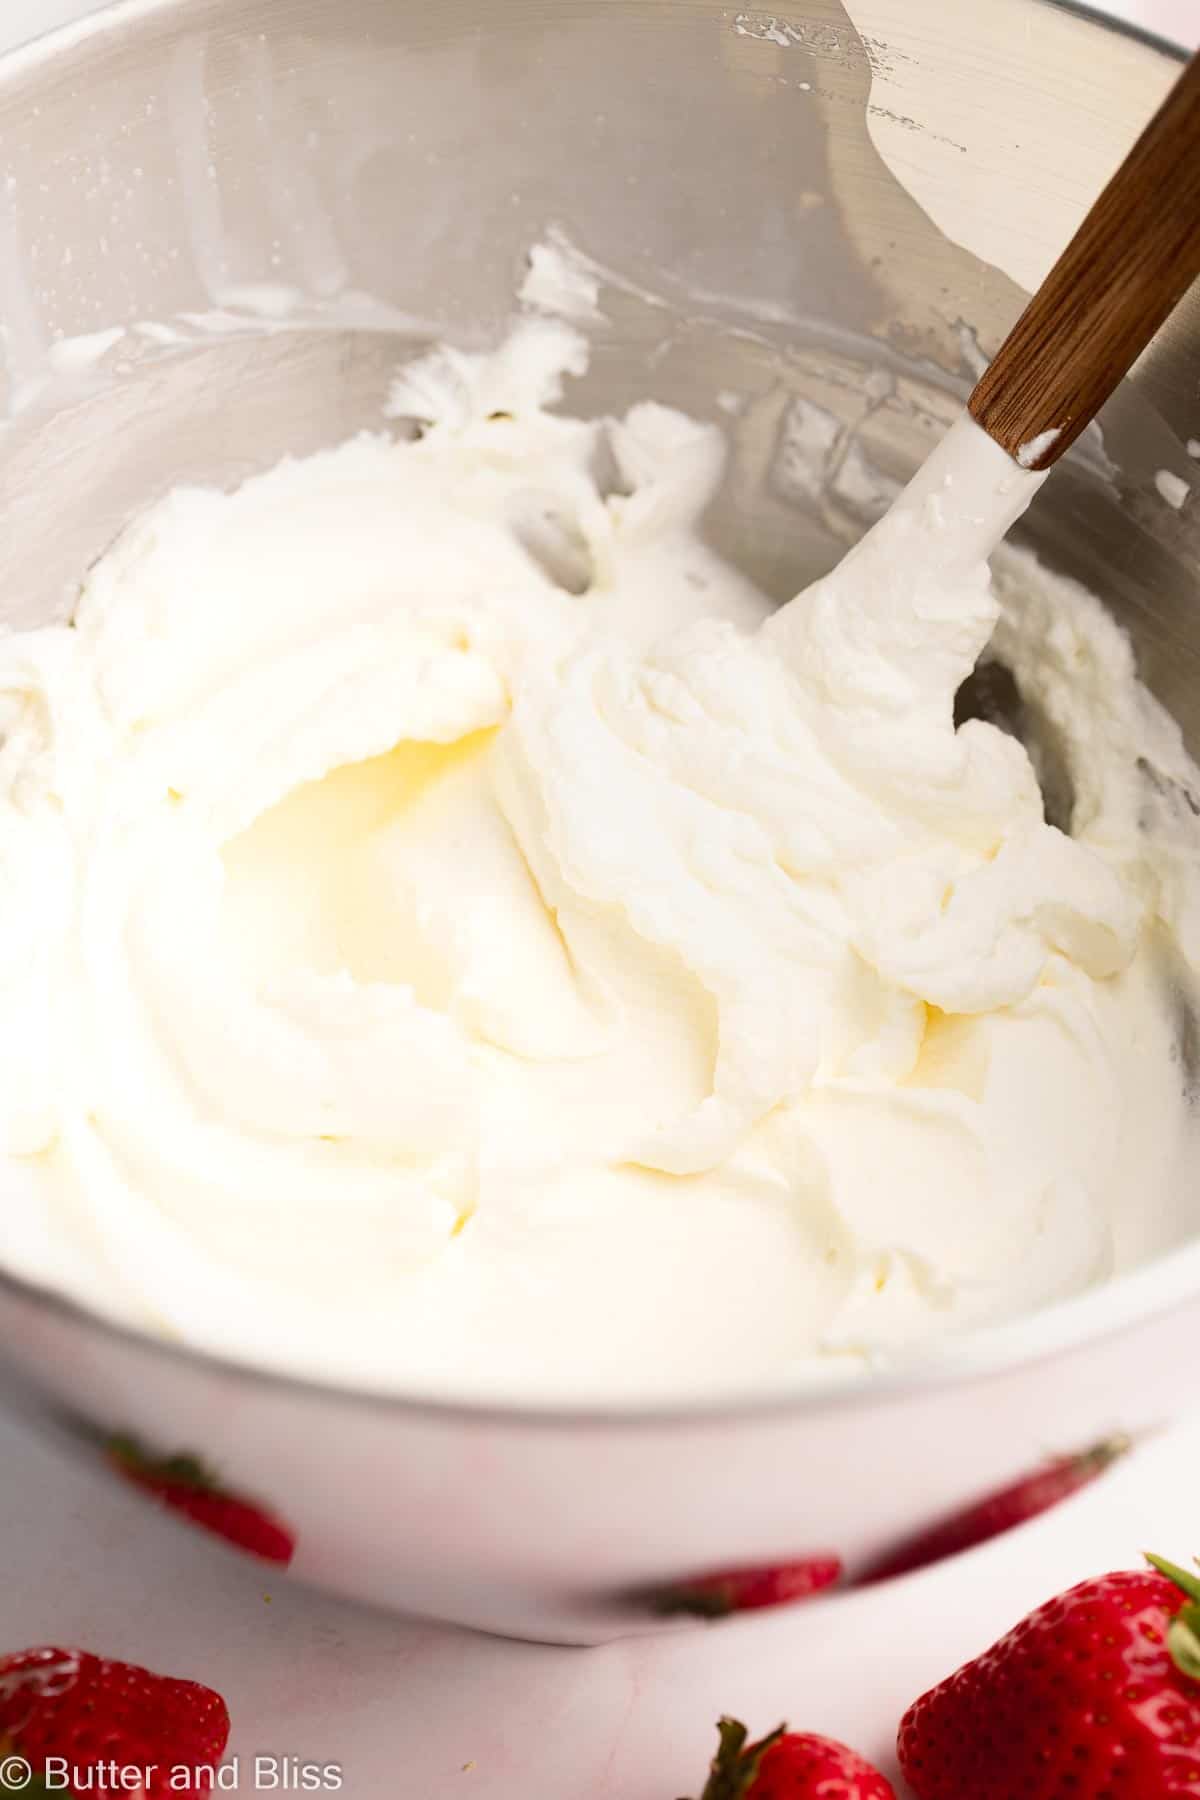 A mixing bowl full of fluffy whipped cream.